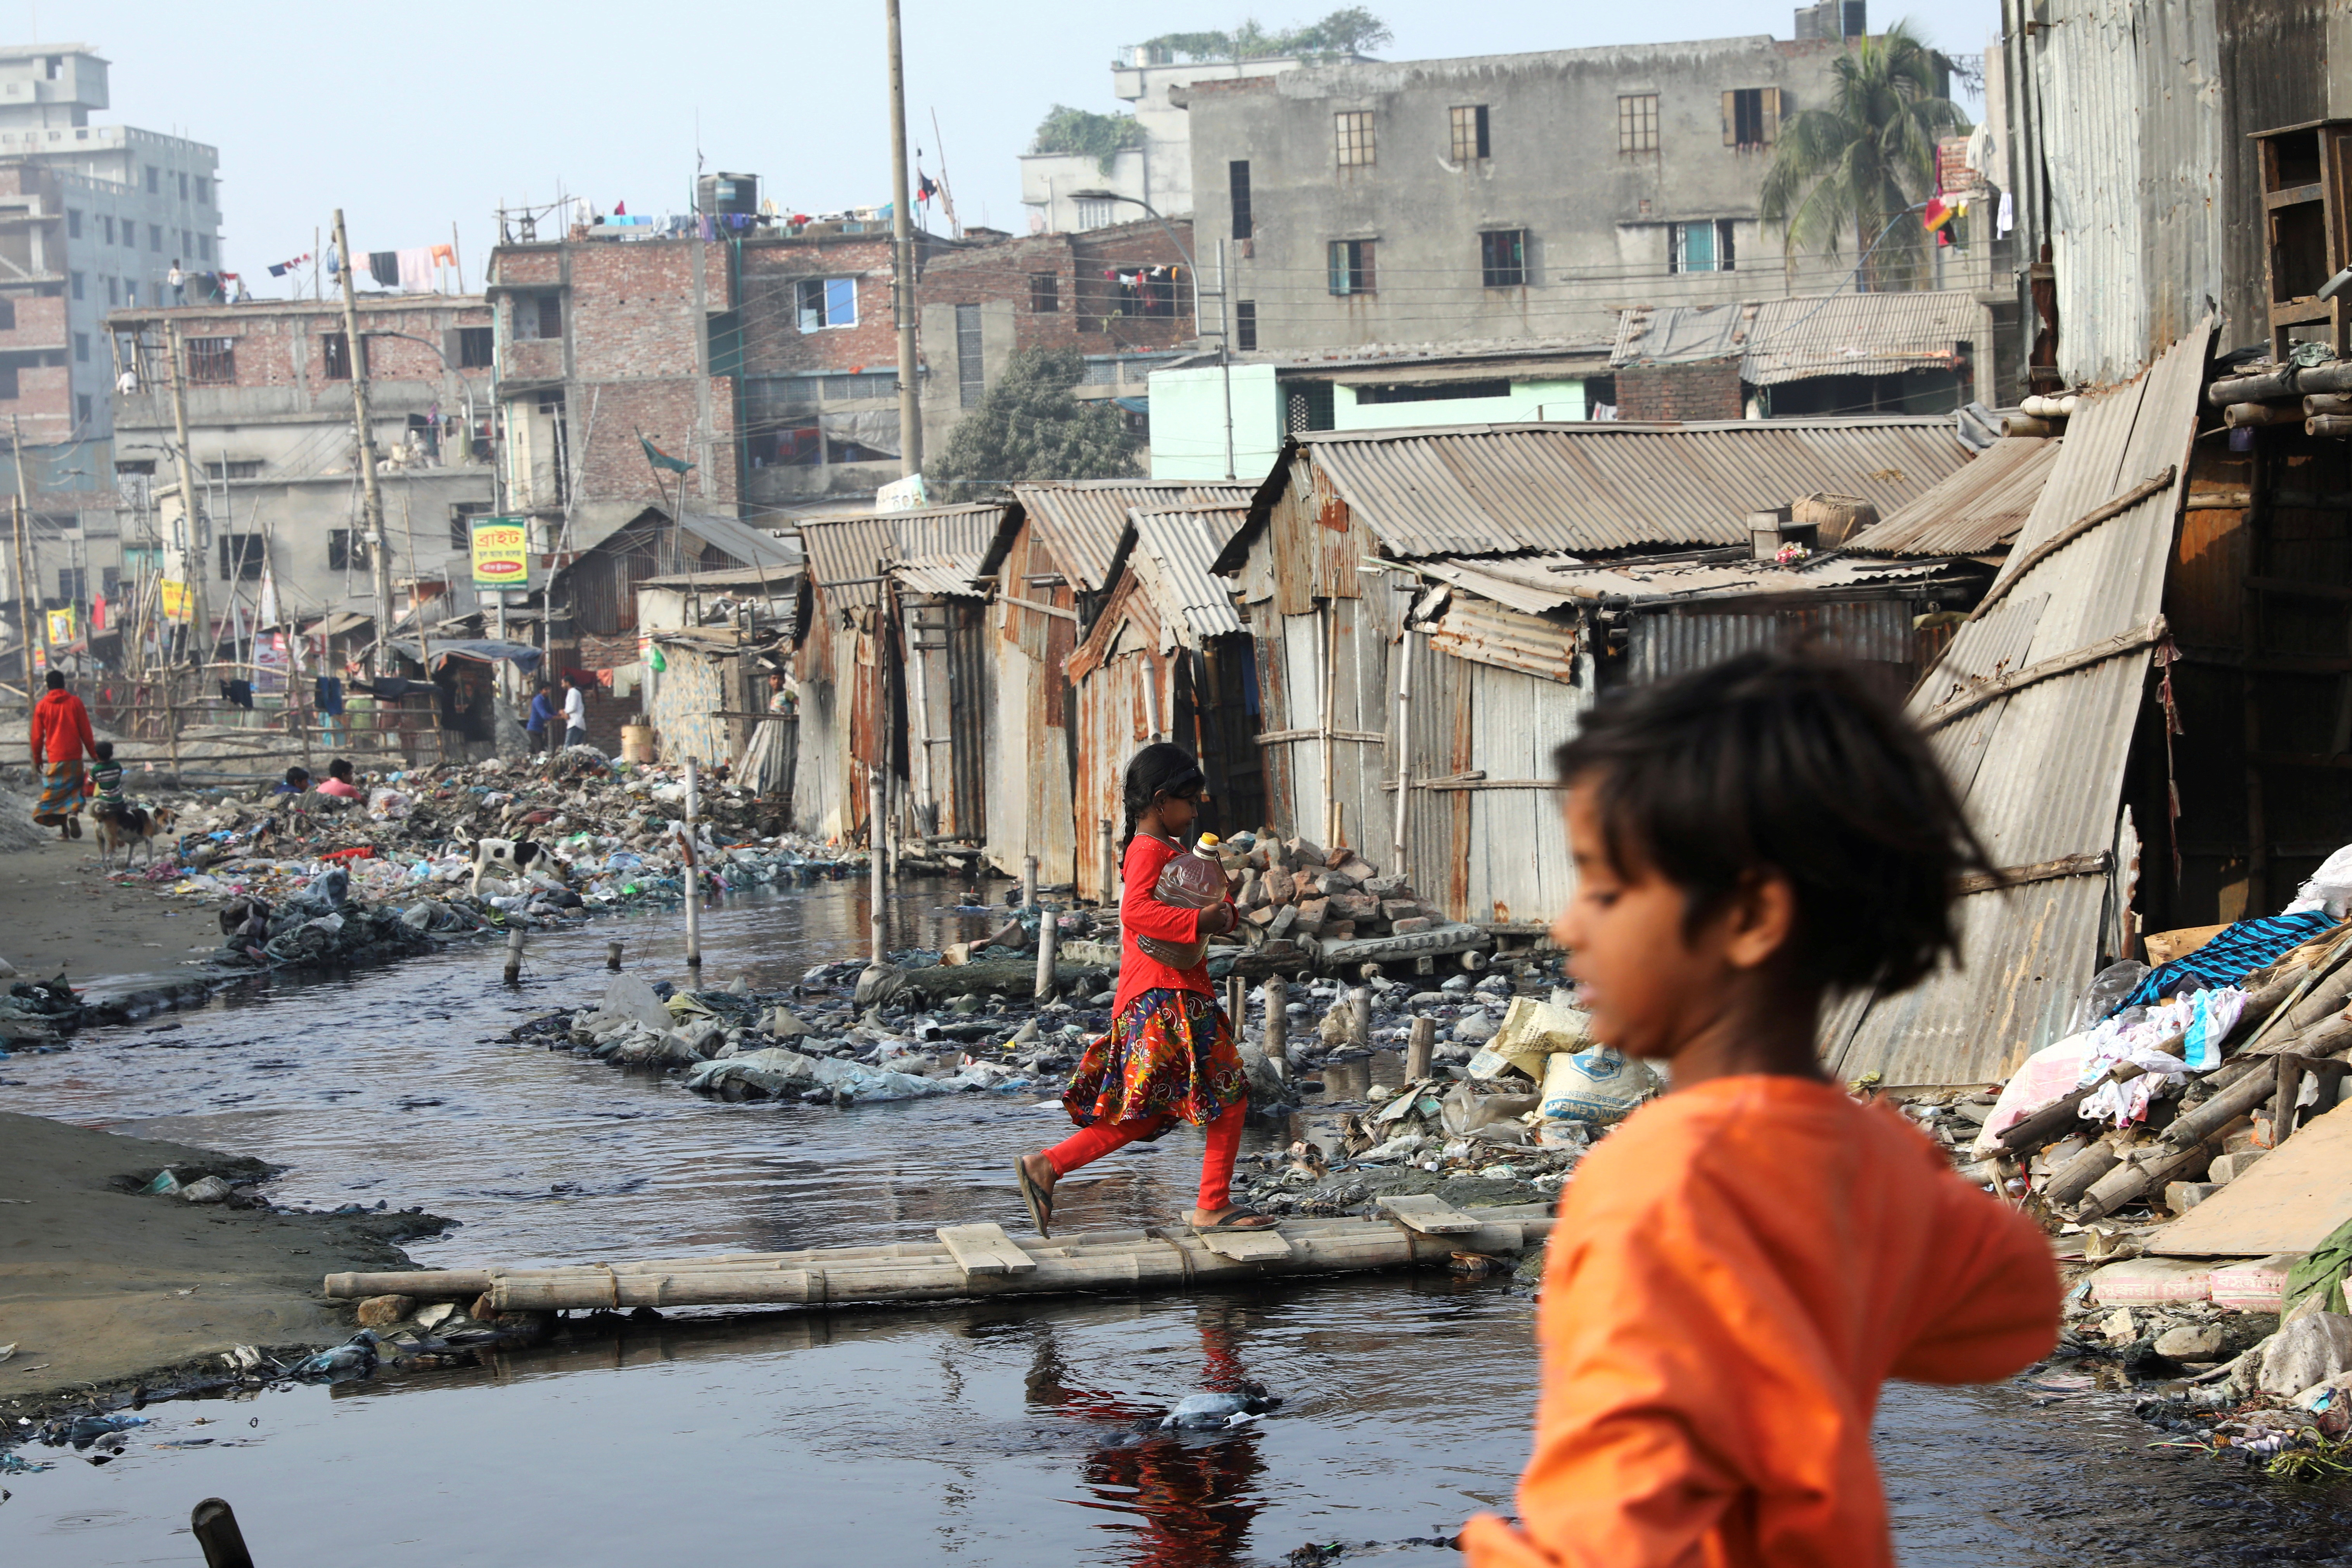 A girl carries a water bottle in a polluted slum area in Dhaka